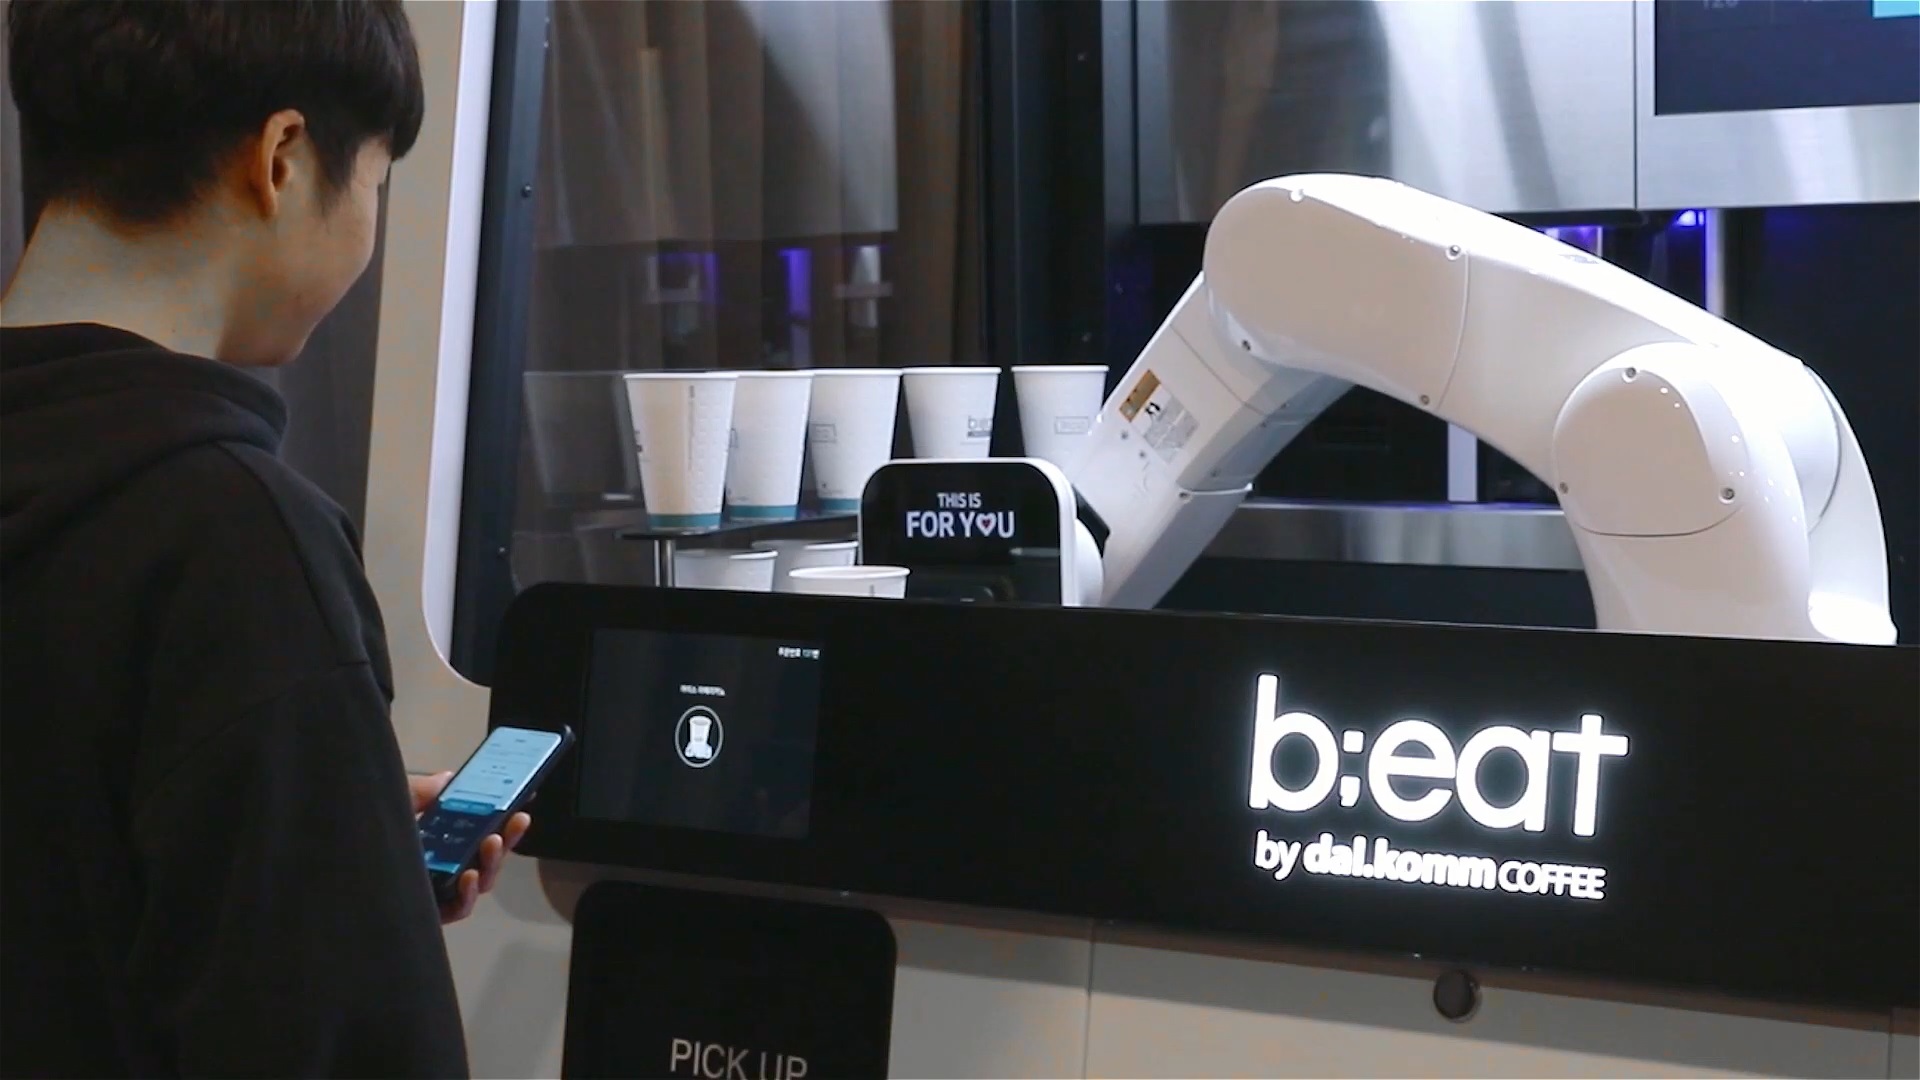 Фото: INTERVIEW | A Robot cafe b;eat2E made by Dal.komm coffee 